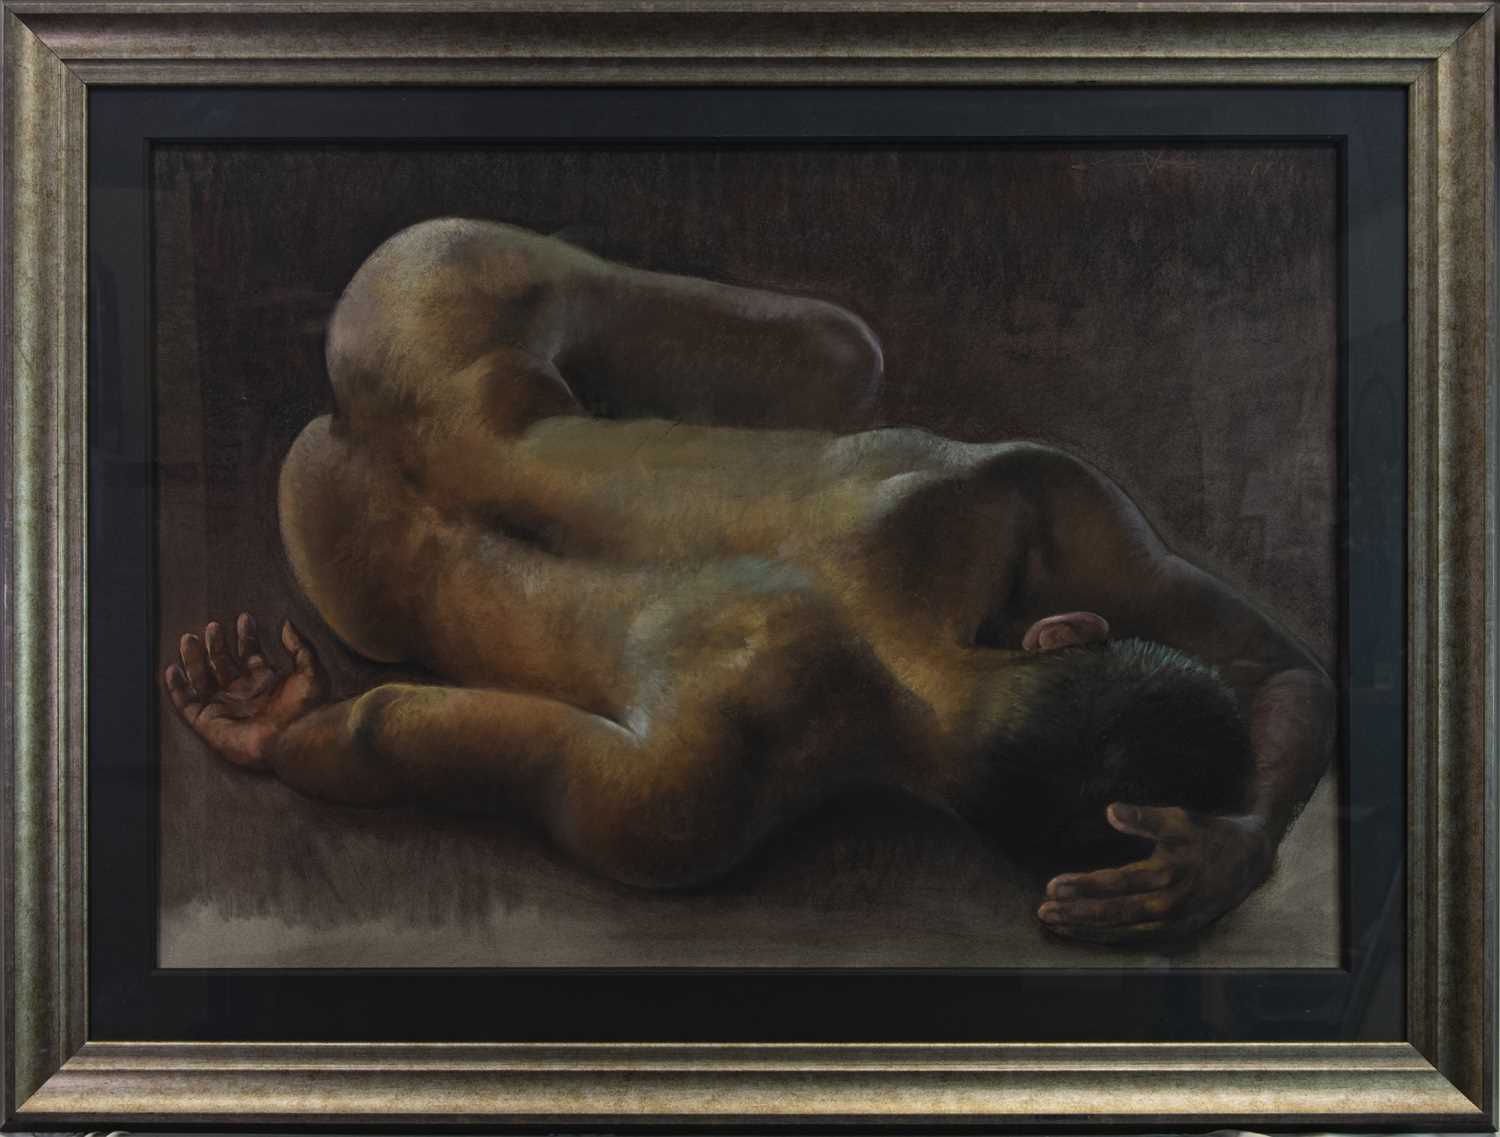 Lot 537 - ANCIENT DREAM A PASTEL BY GOO CHEUNG HANG